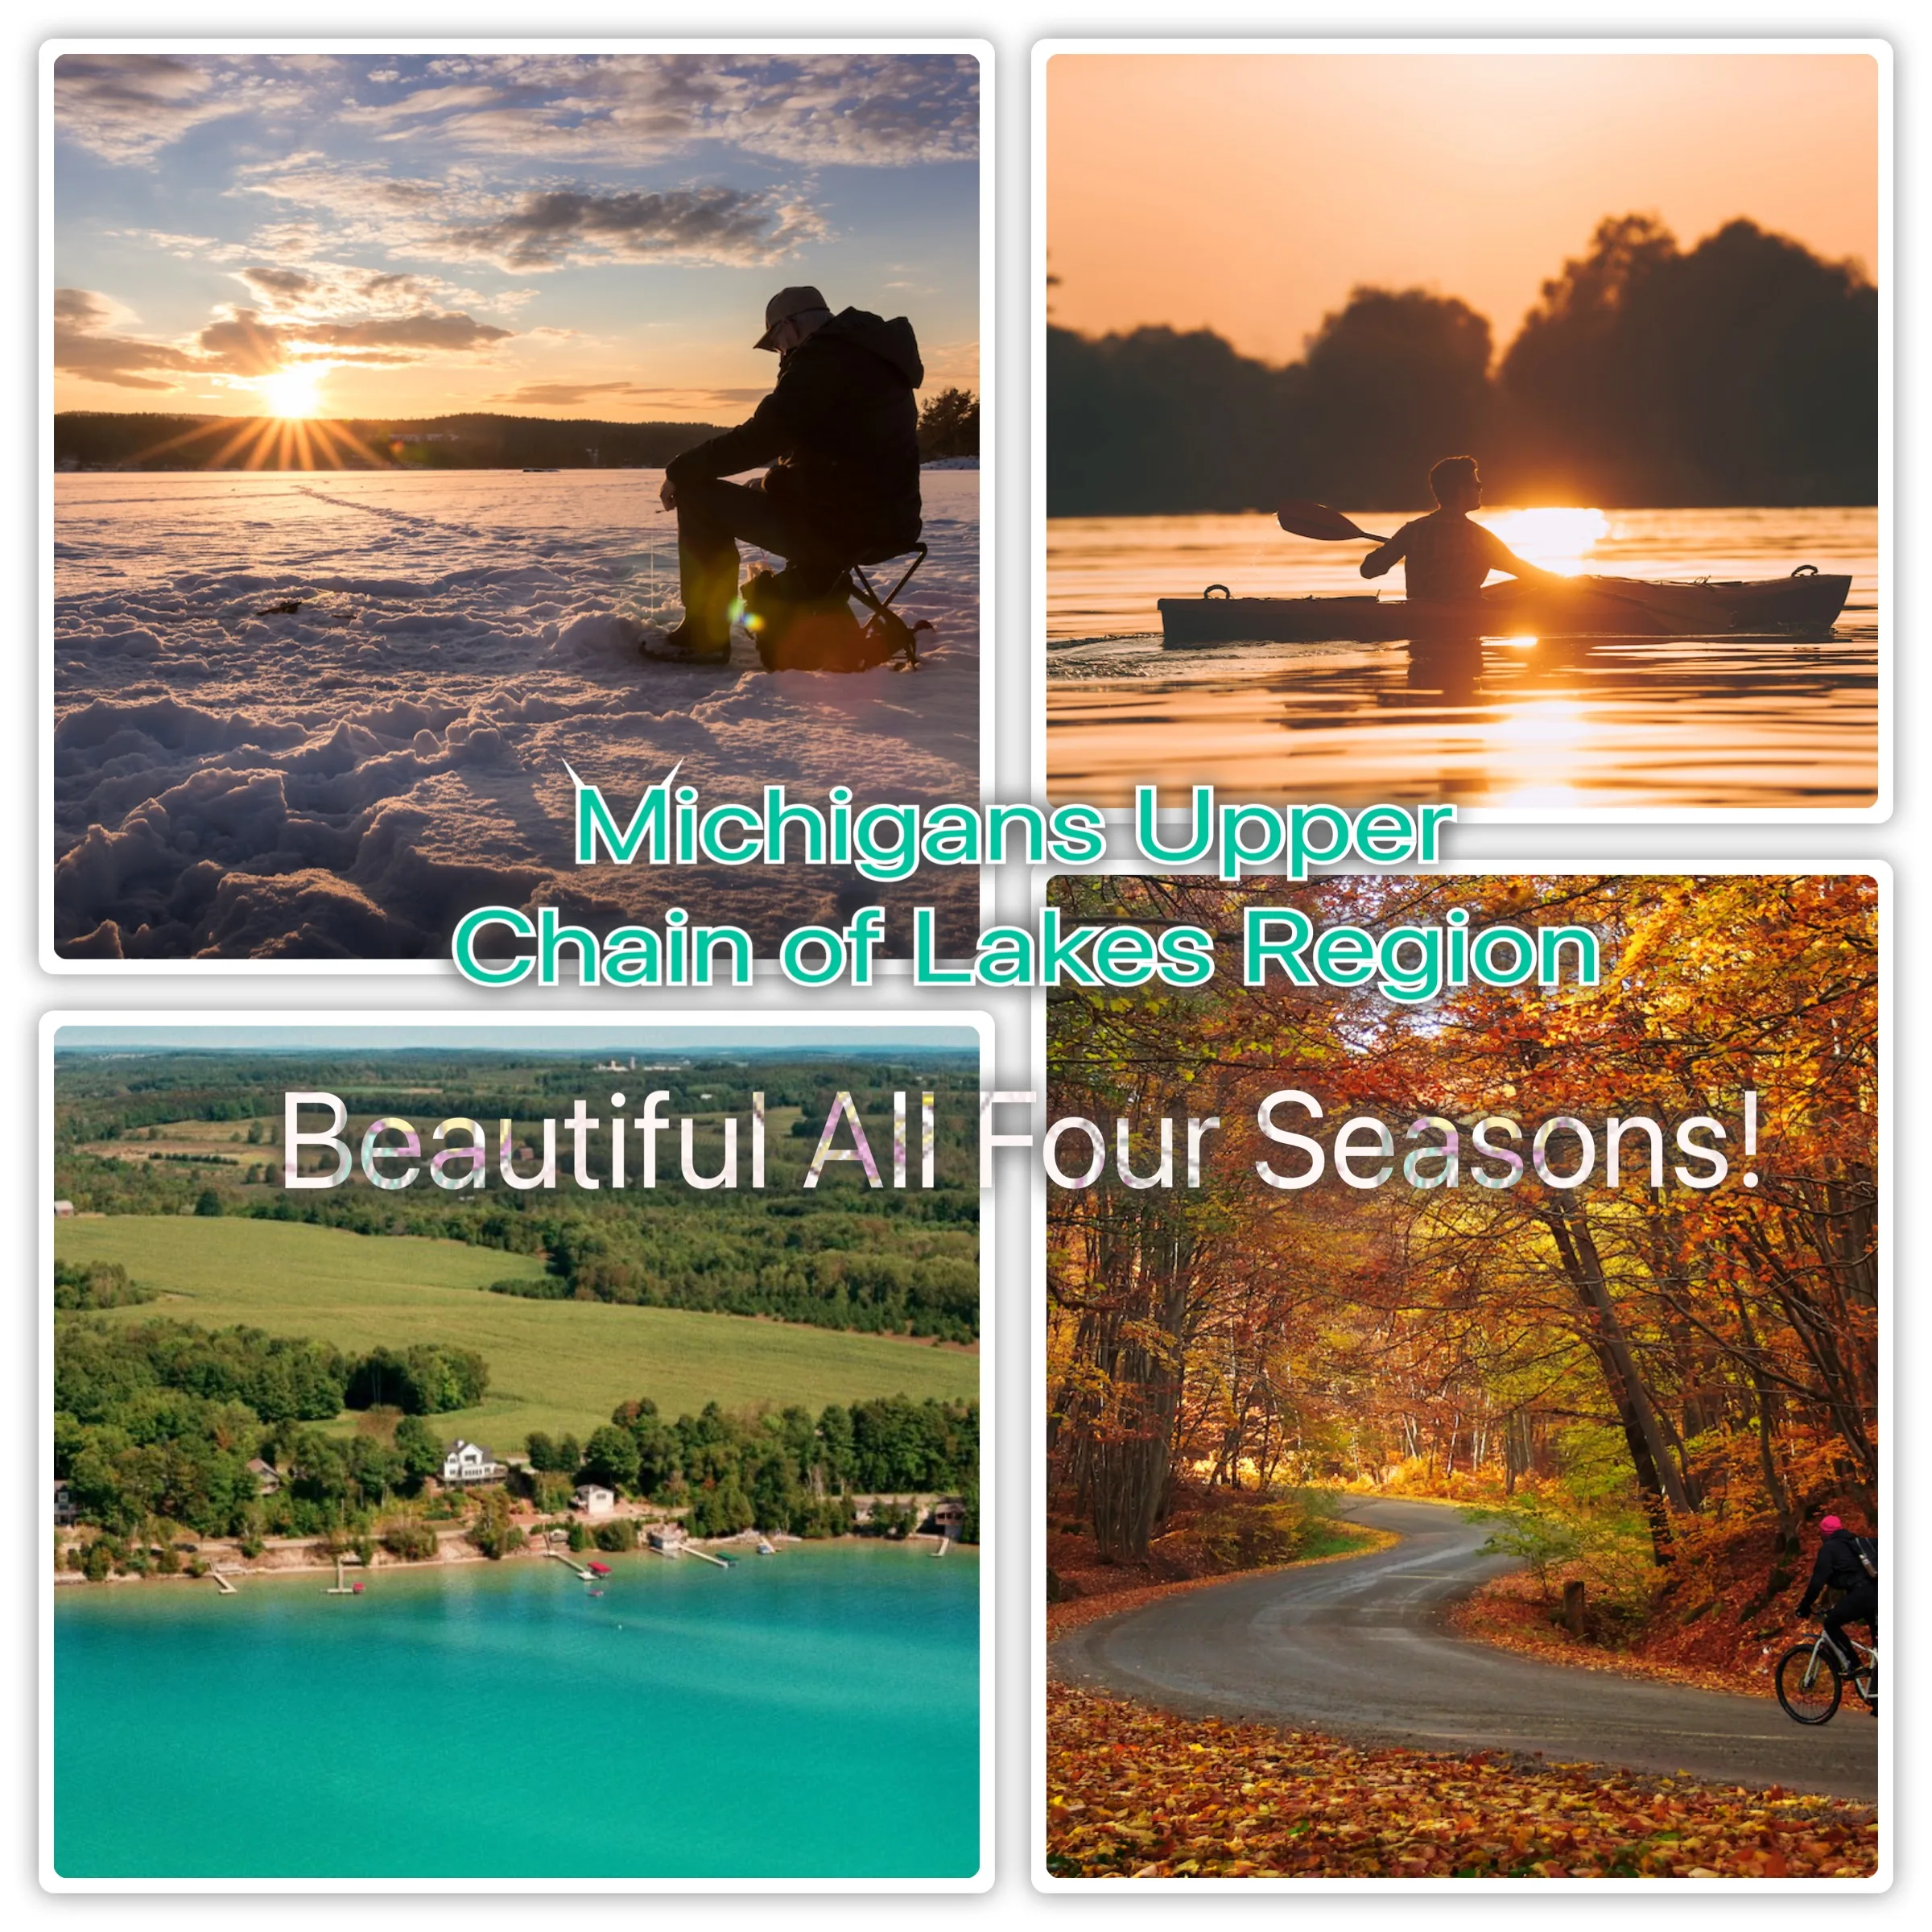 Four pictures of different seasons in the Upper Chain of Lakes Region